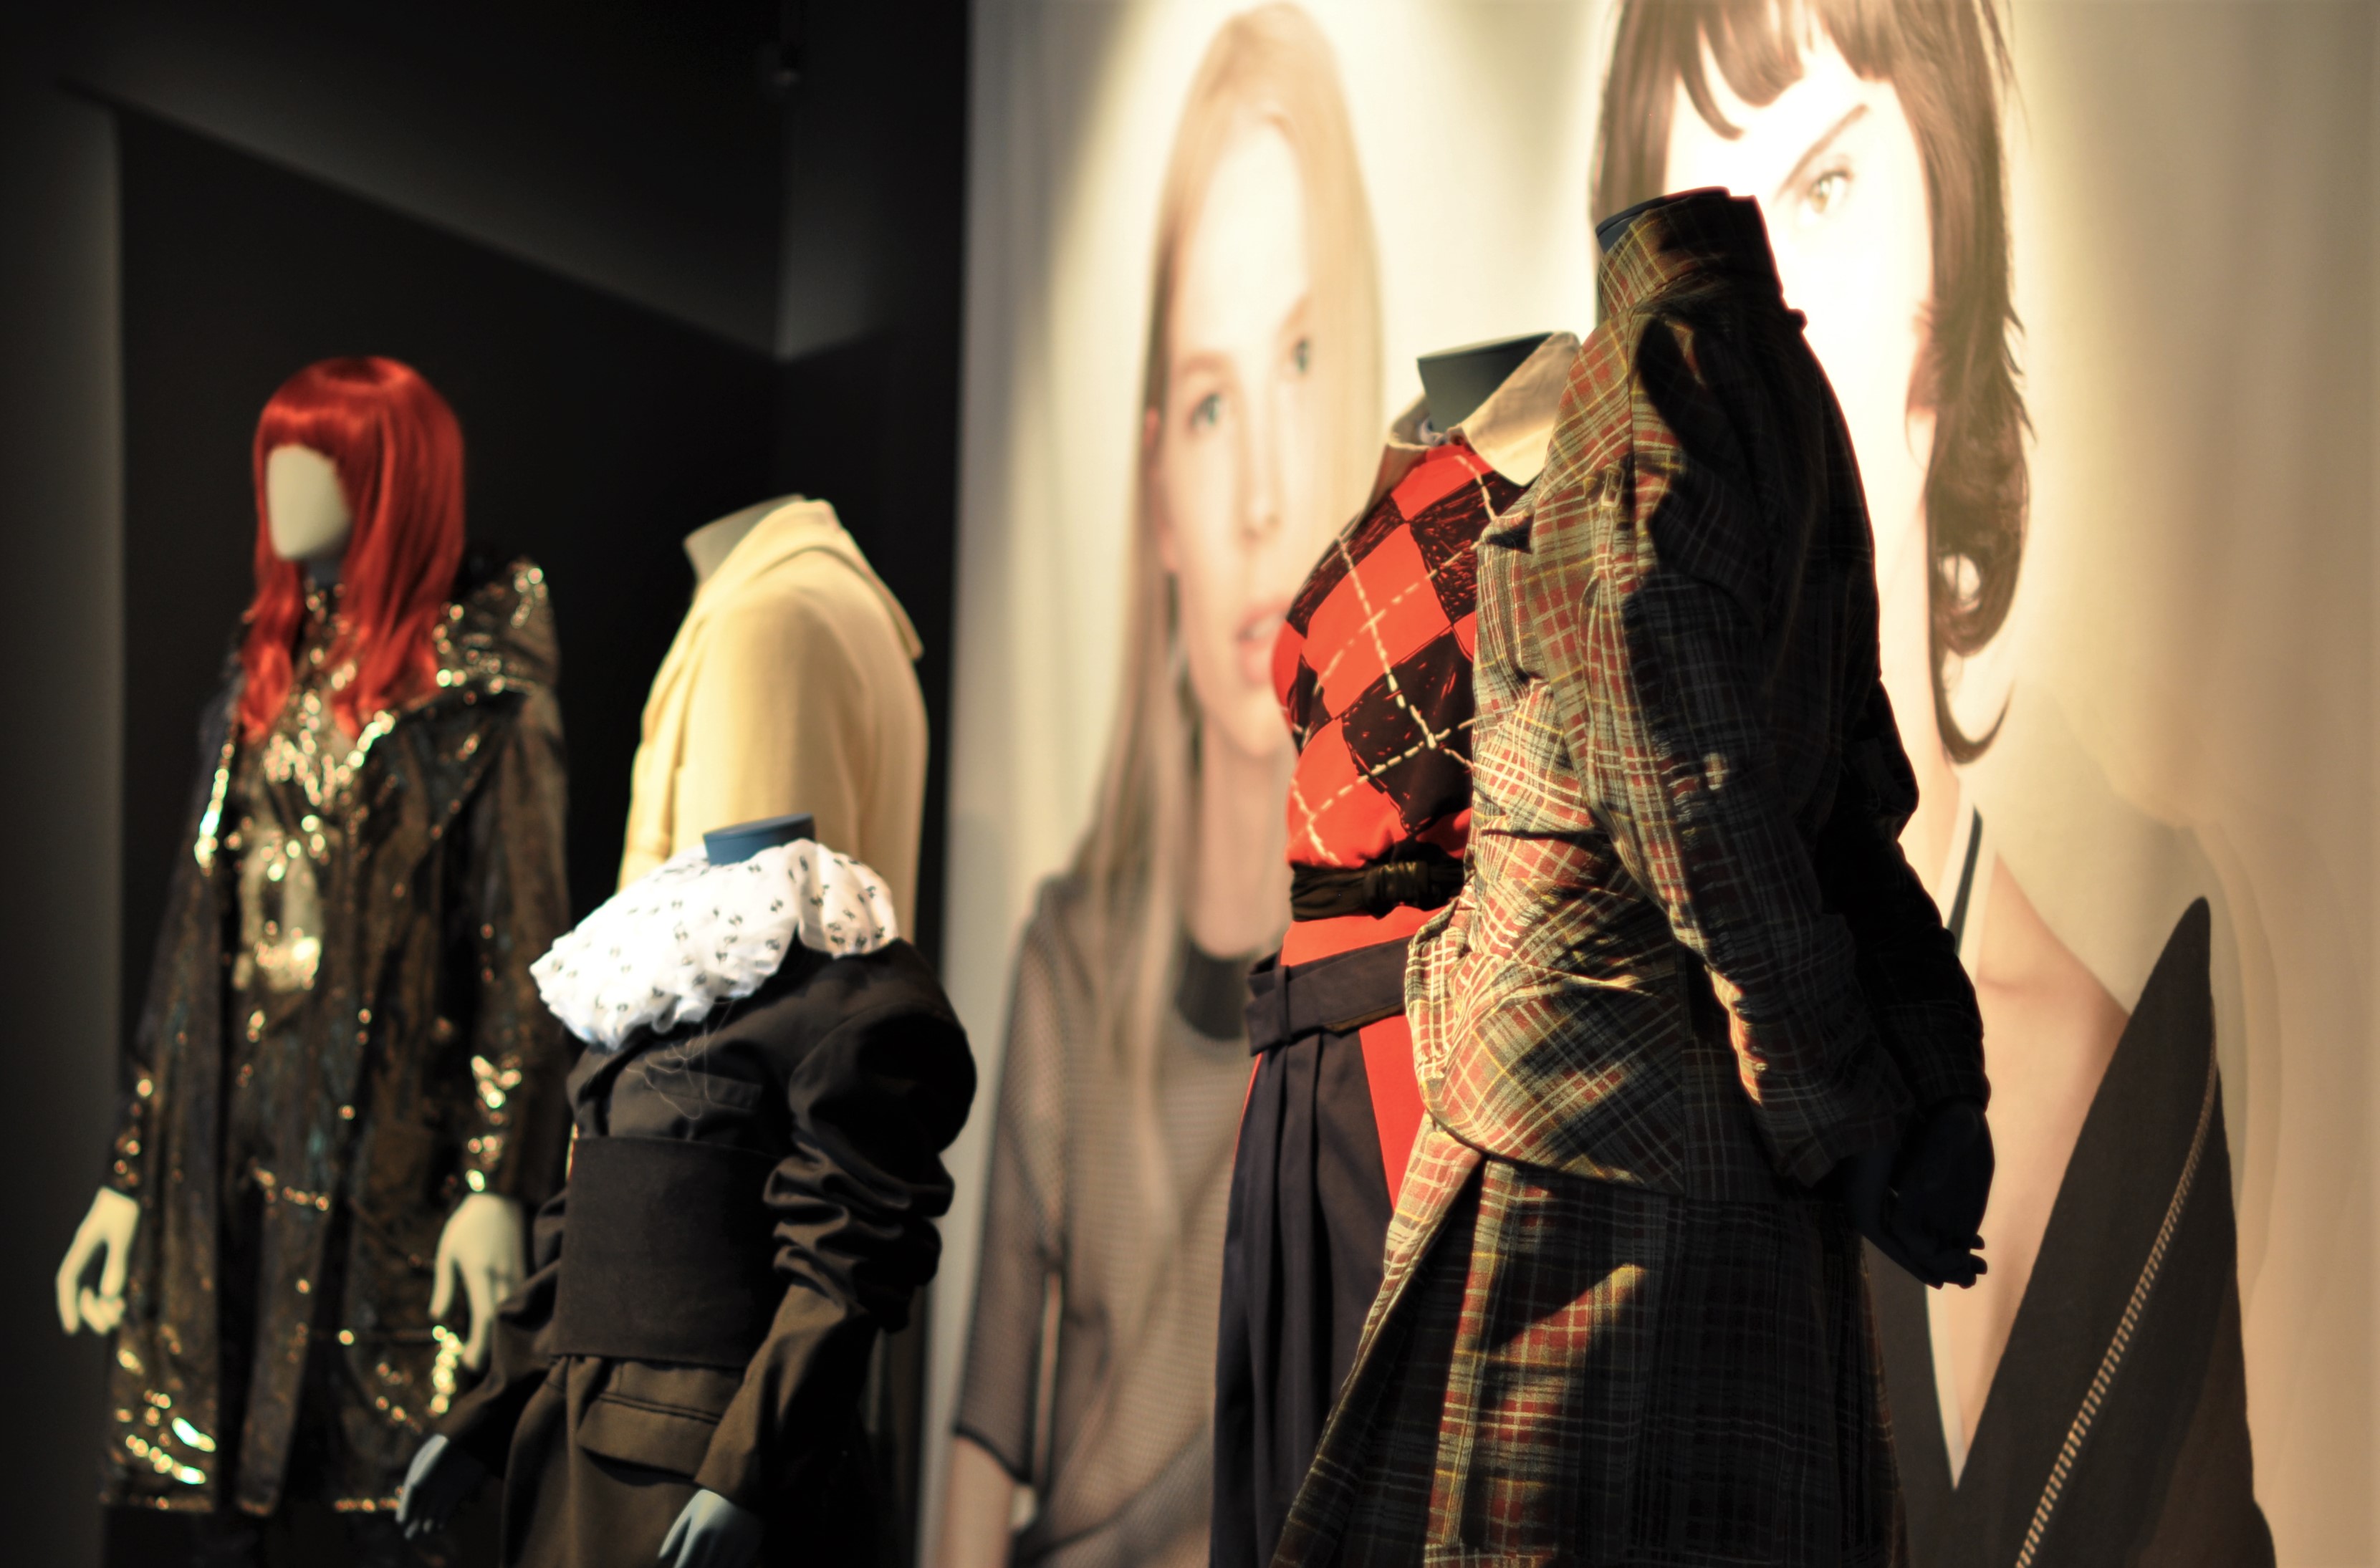 Five mannequins styled against exhibition backdrop.